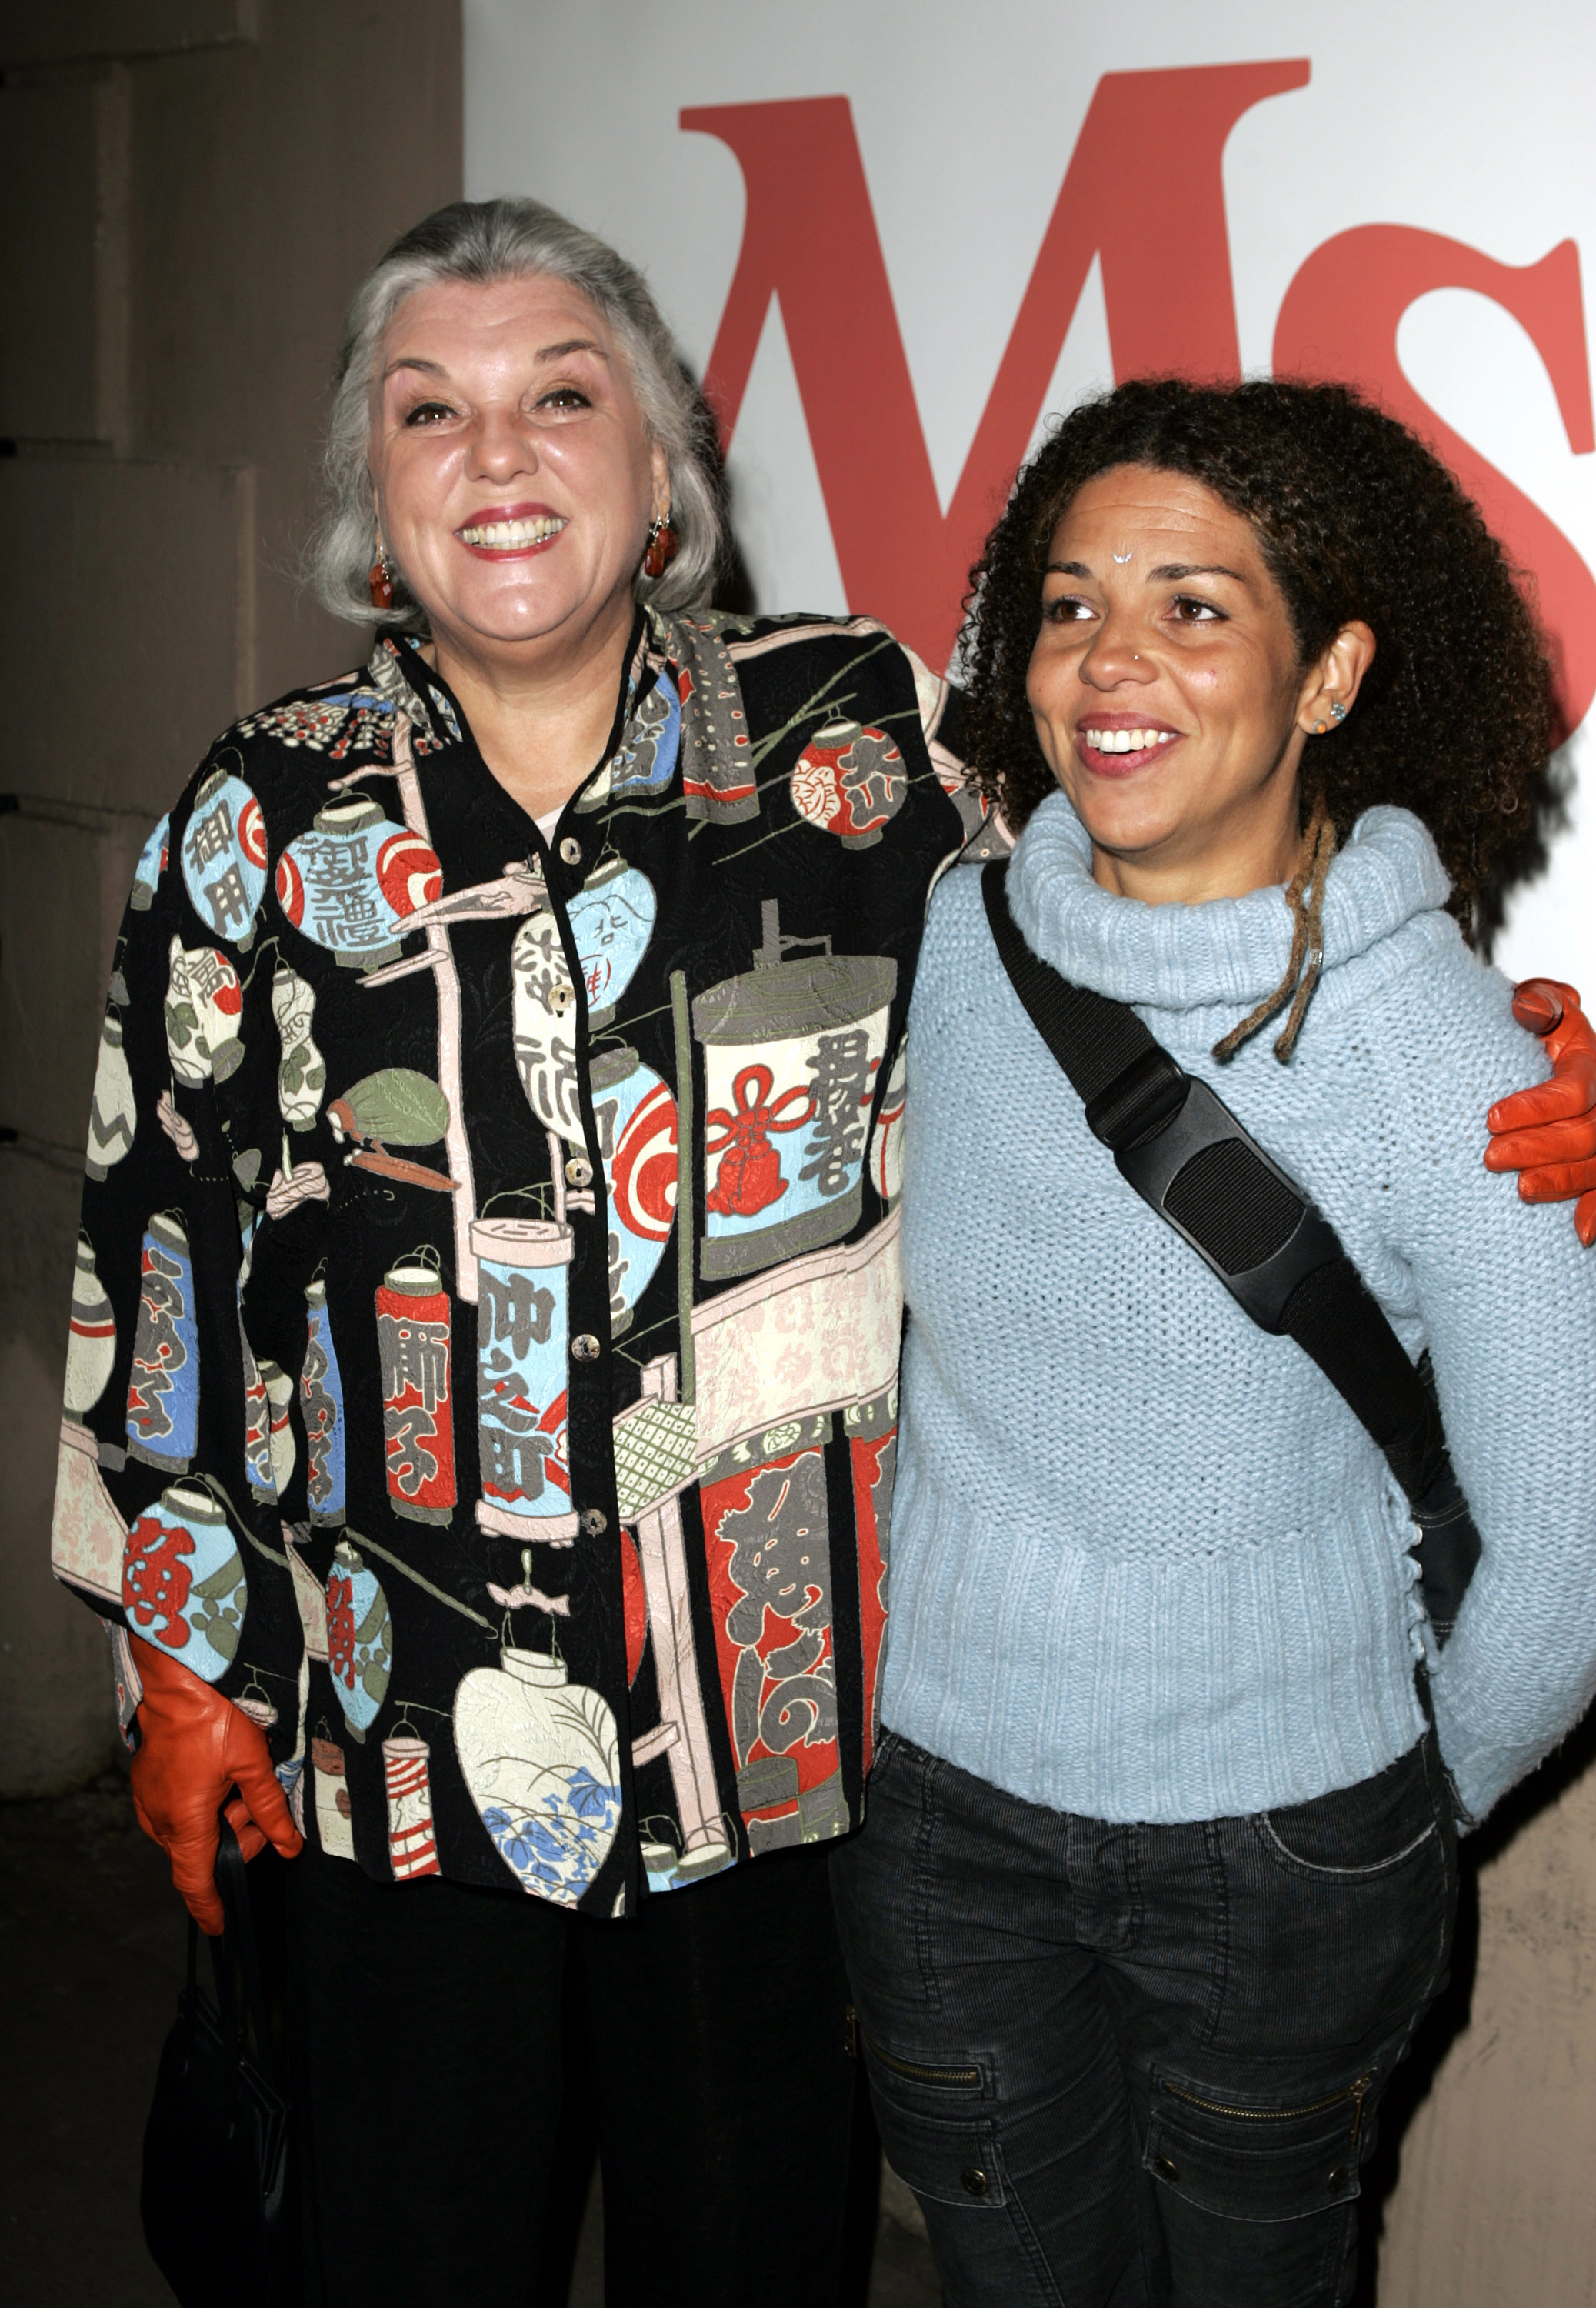 Tyne Daly and her daughter Alisabeth Brown during Ms. Magazine Celebrates Kathy Najimy as One of its 2004 Women of The Year in Los Angeles, California, on November 29, 2004 | Source: Getty Images